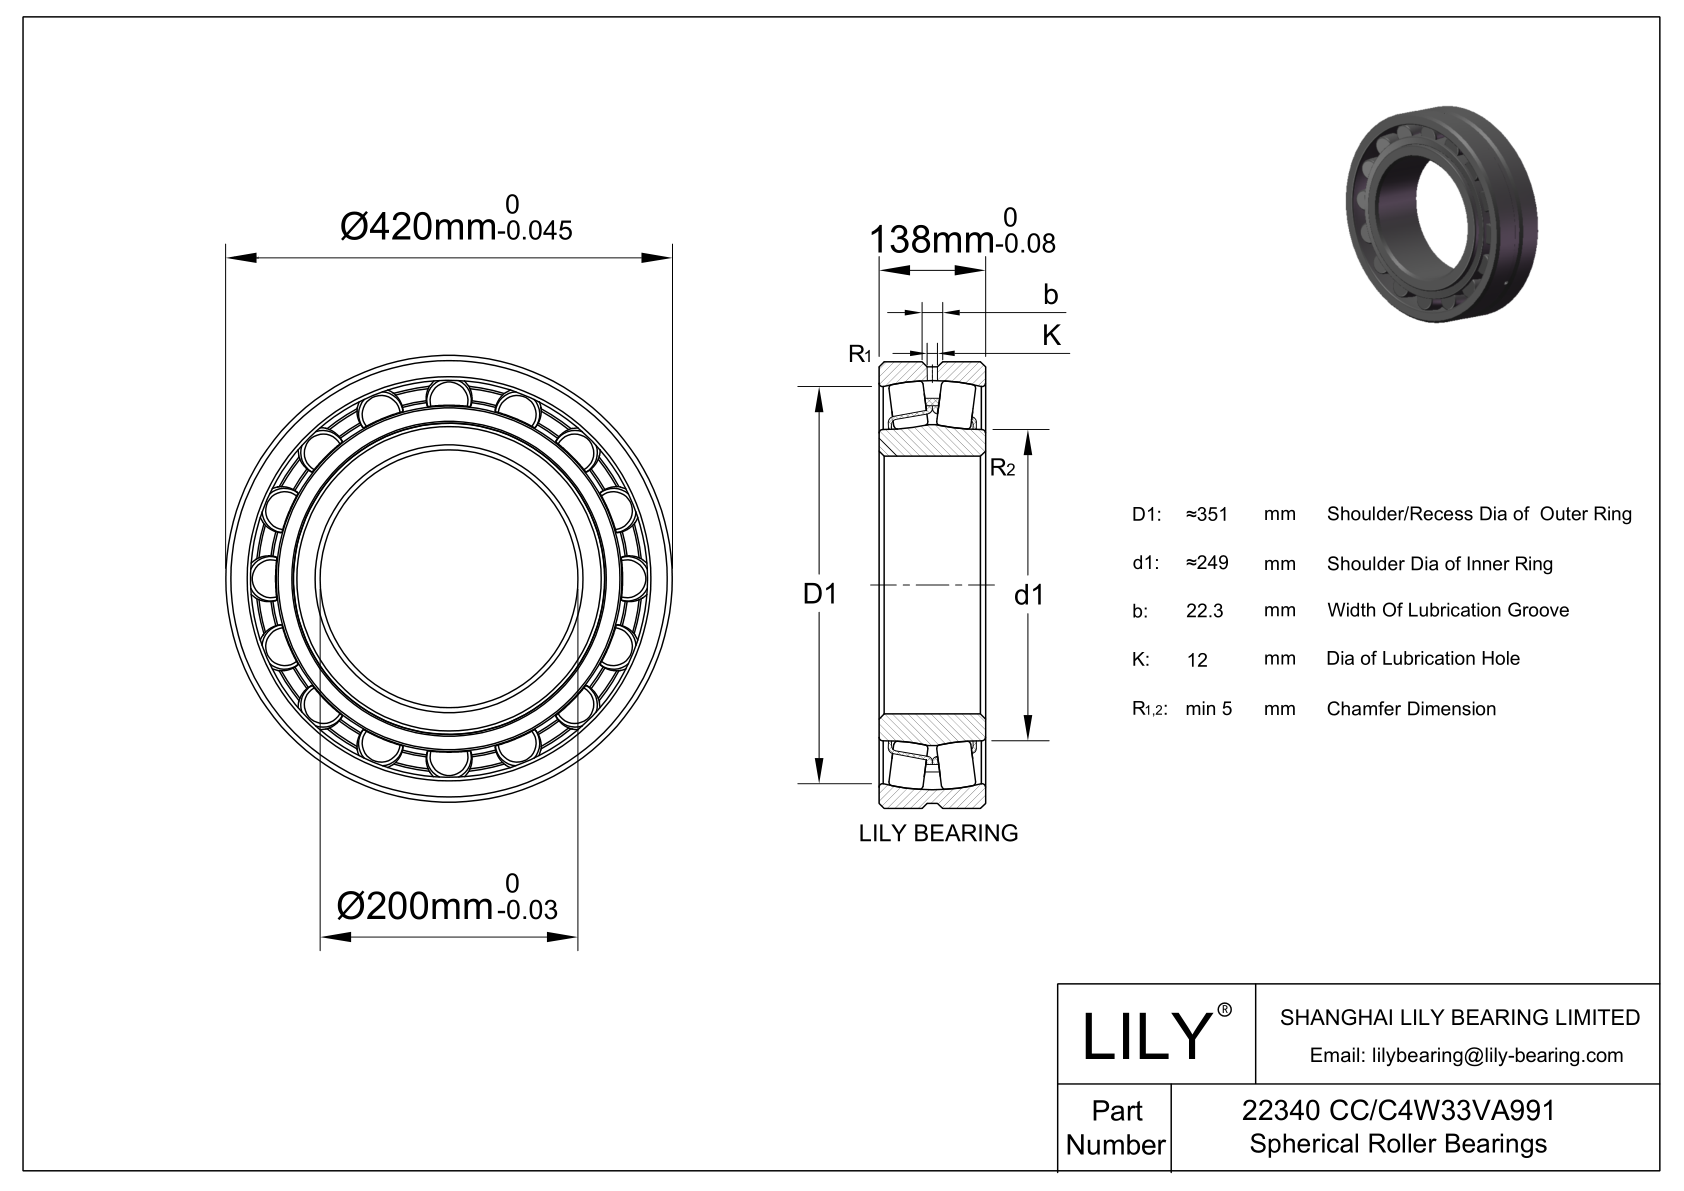 22340 CC/C4W33VA991 Double Row Spherical Roller Bearing cad drawing